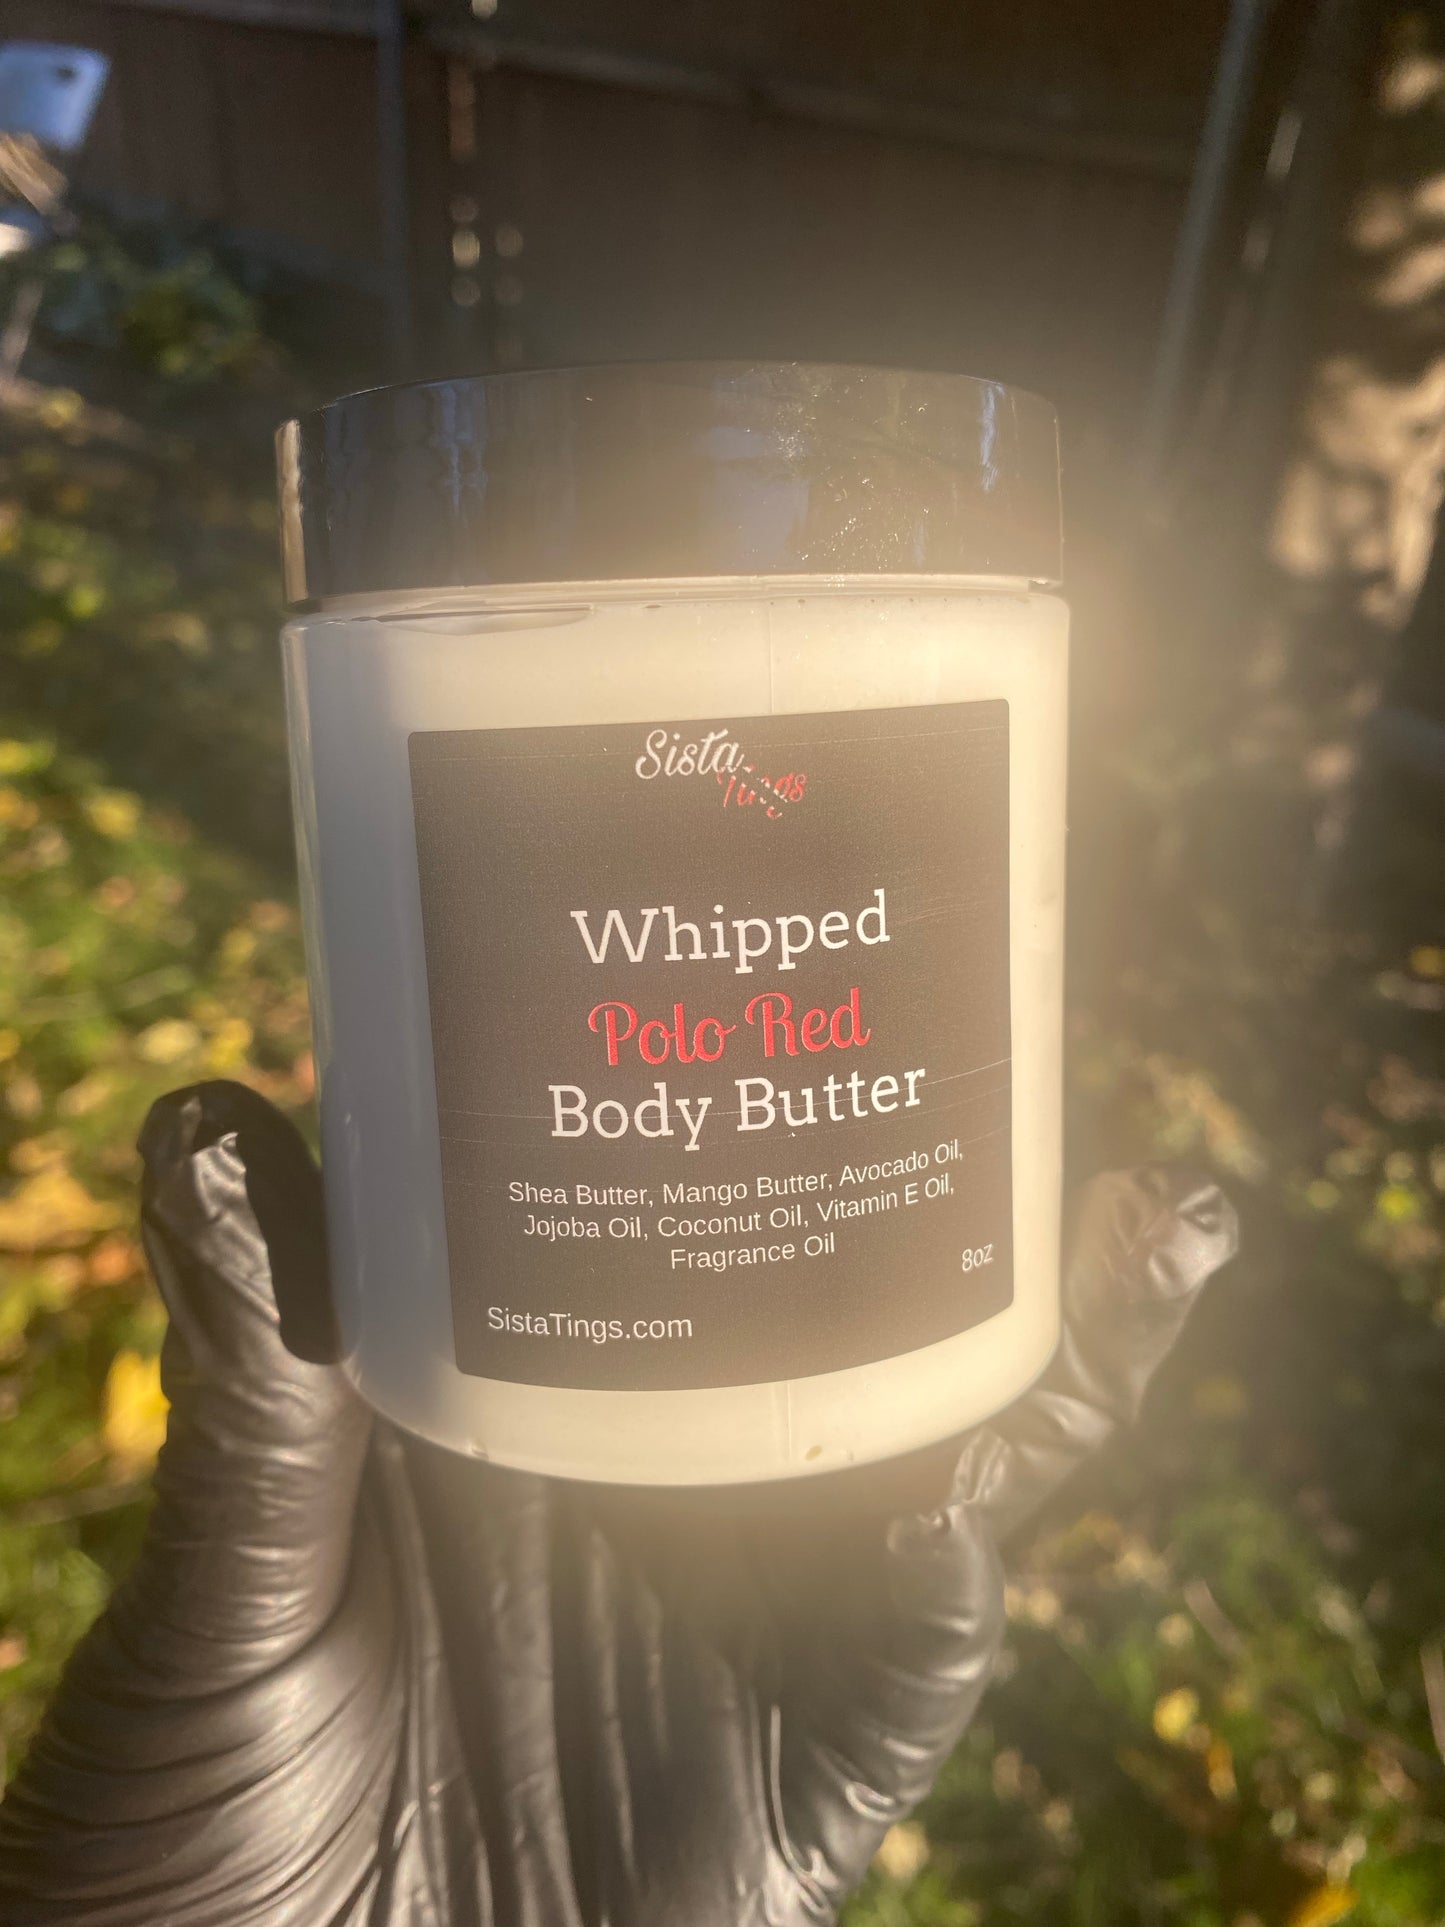 Whipped Polo Red Body Butter